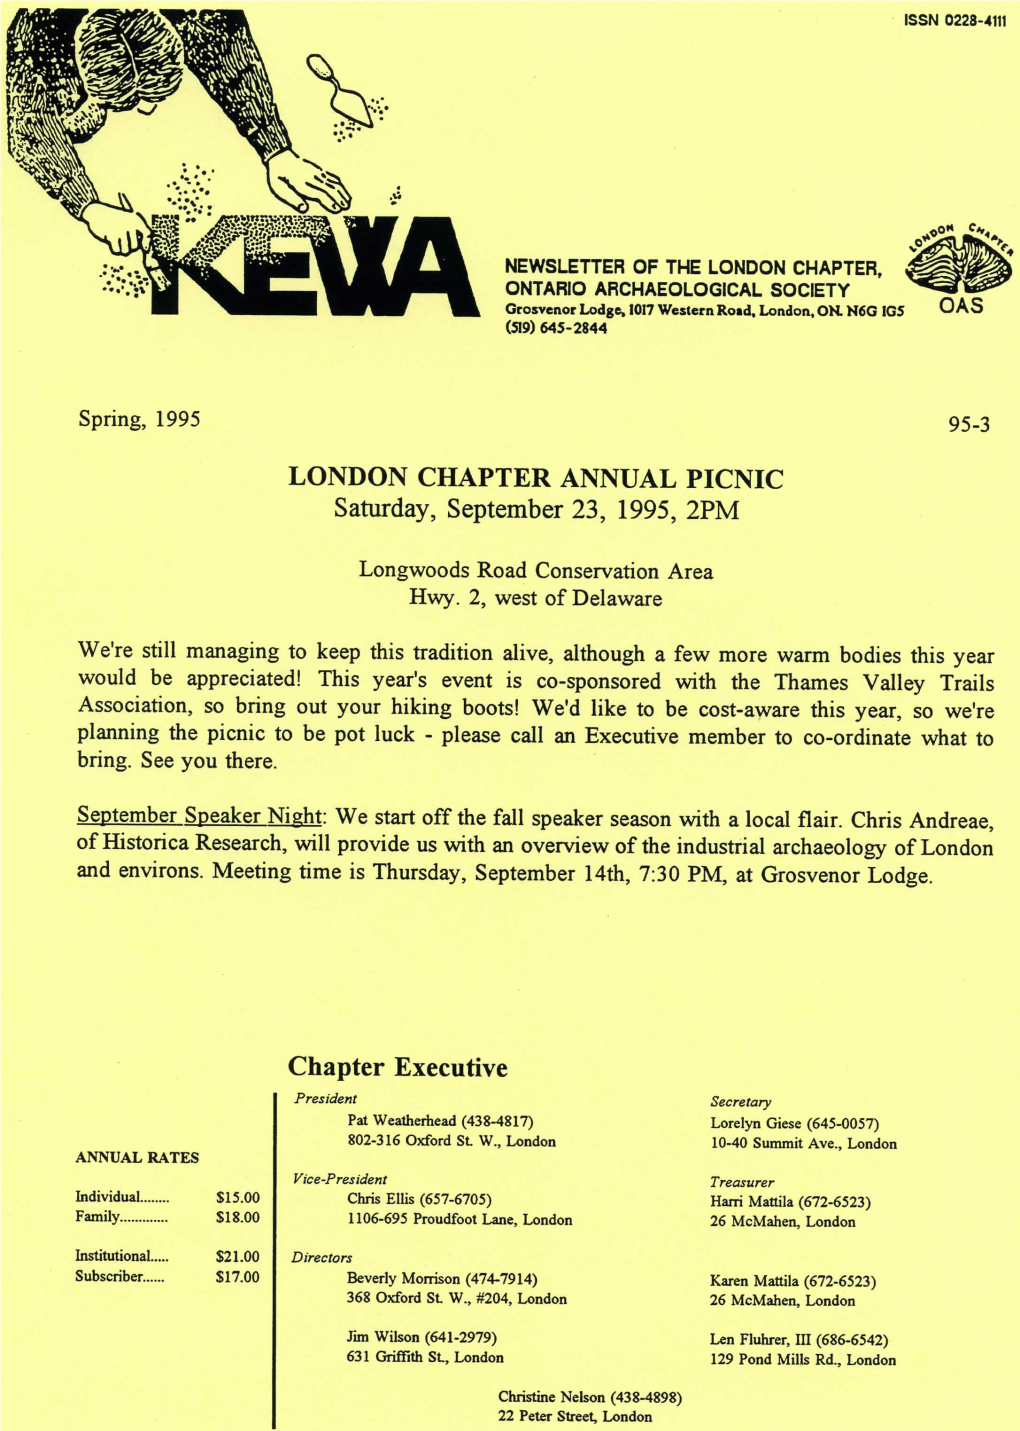 LONDON CHAPTER ANNUAL PICNIC Saturday, September 23, 1995, 2PM